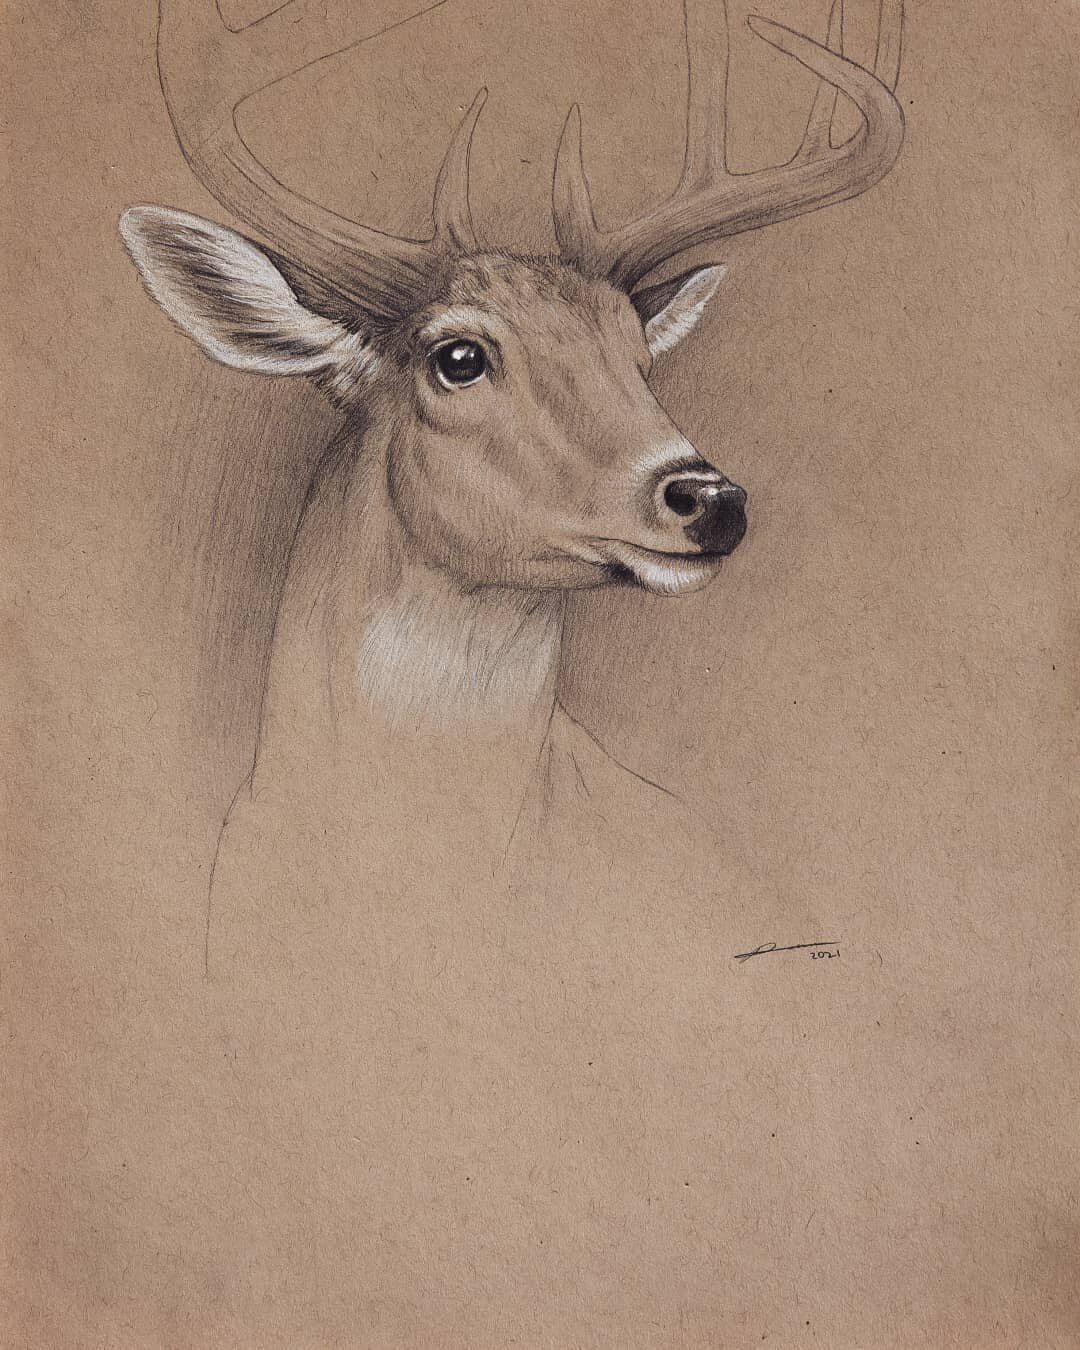 Whitetail Deer traditional pencil drawing on 9x12 toned paper. From an old tablet drawing I did years ago. #pencildrawing #drawing #traditionalart #animalart